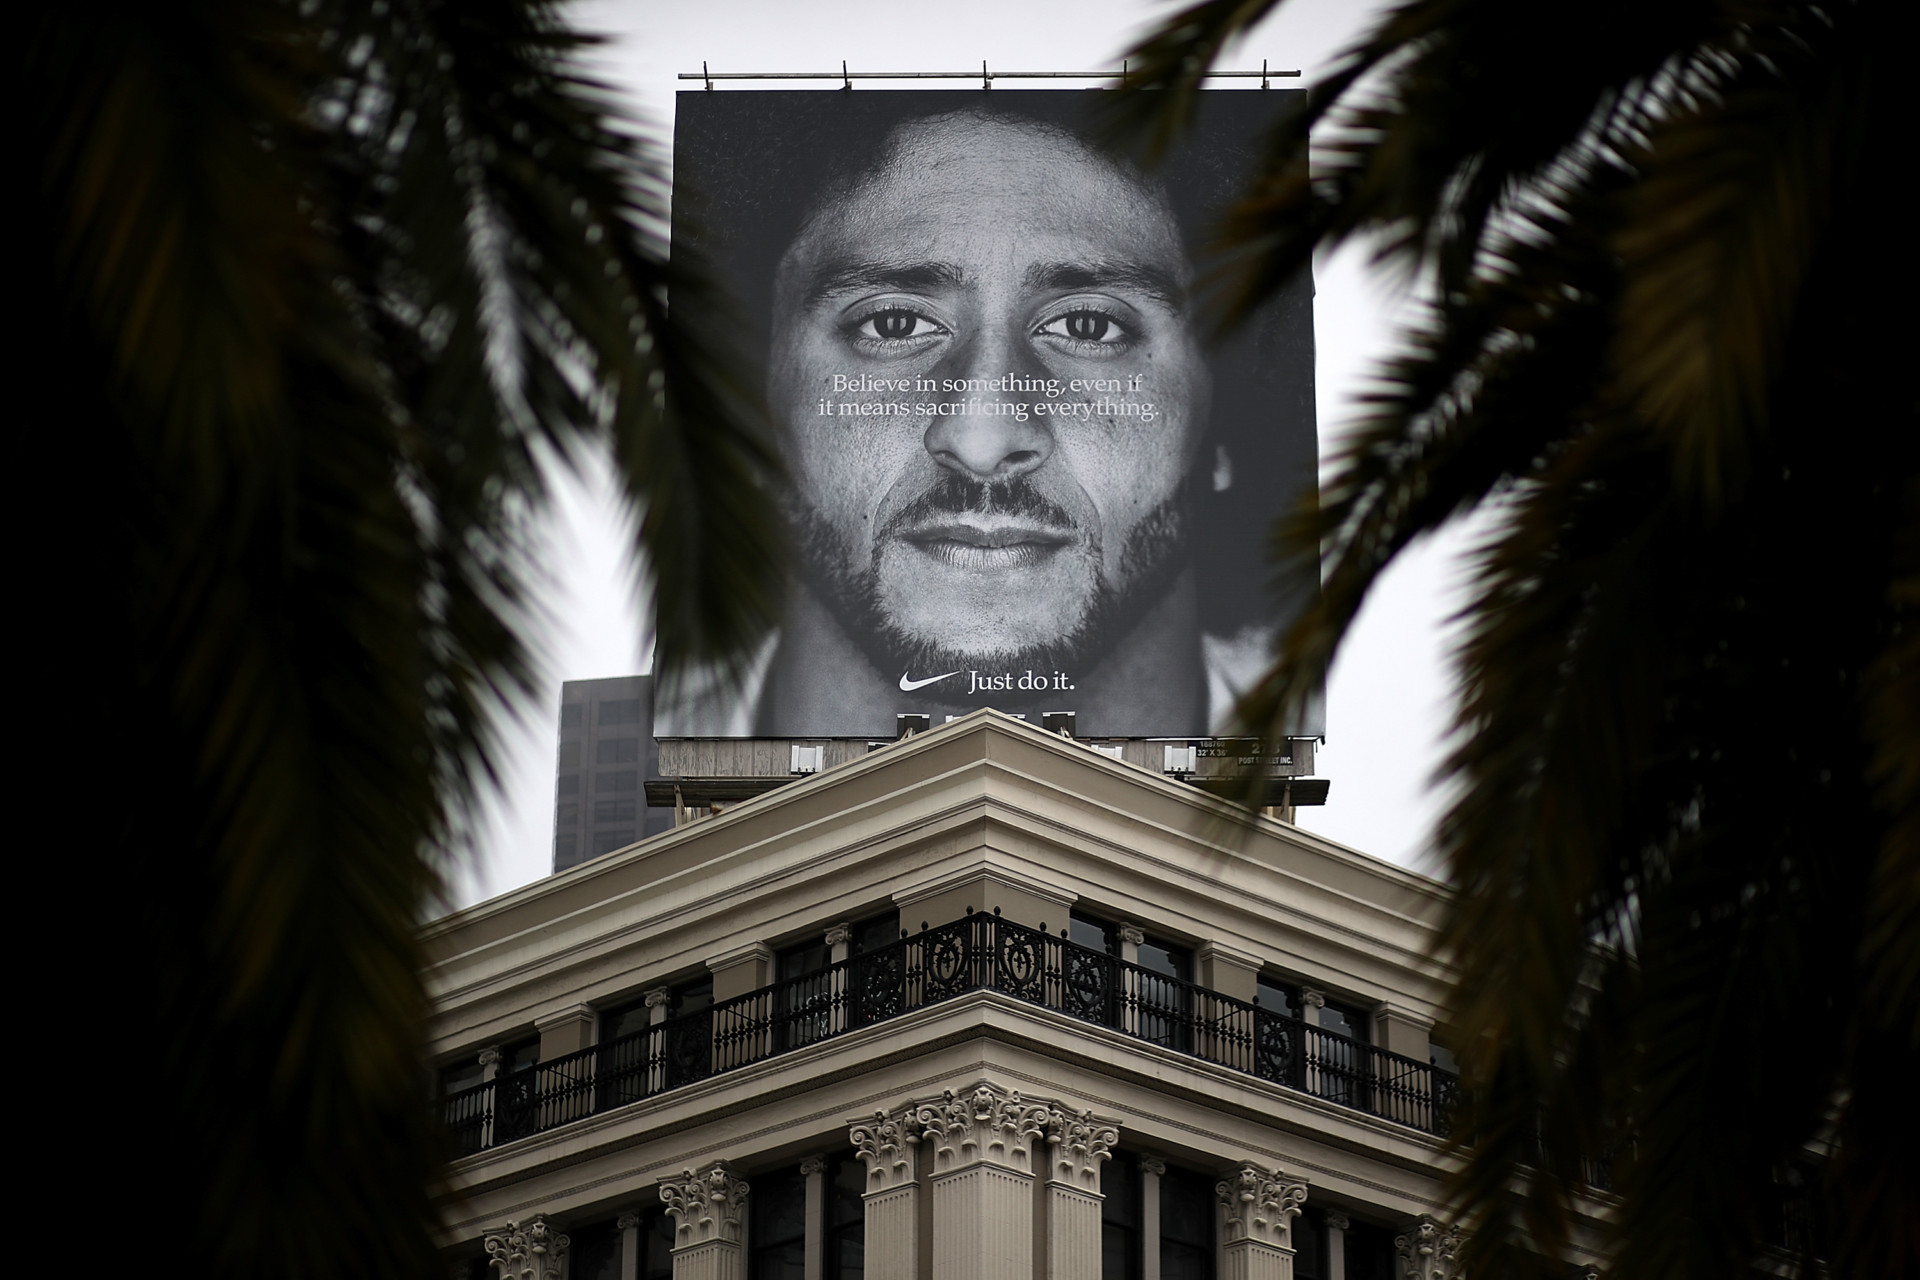 Reputation Took a Hit After Kaepernick Ad. Now It's Back